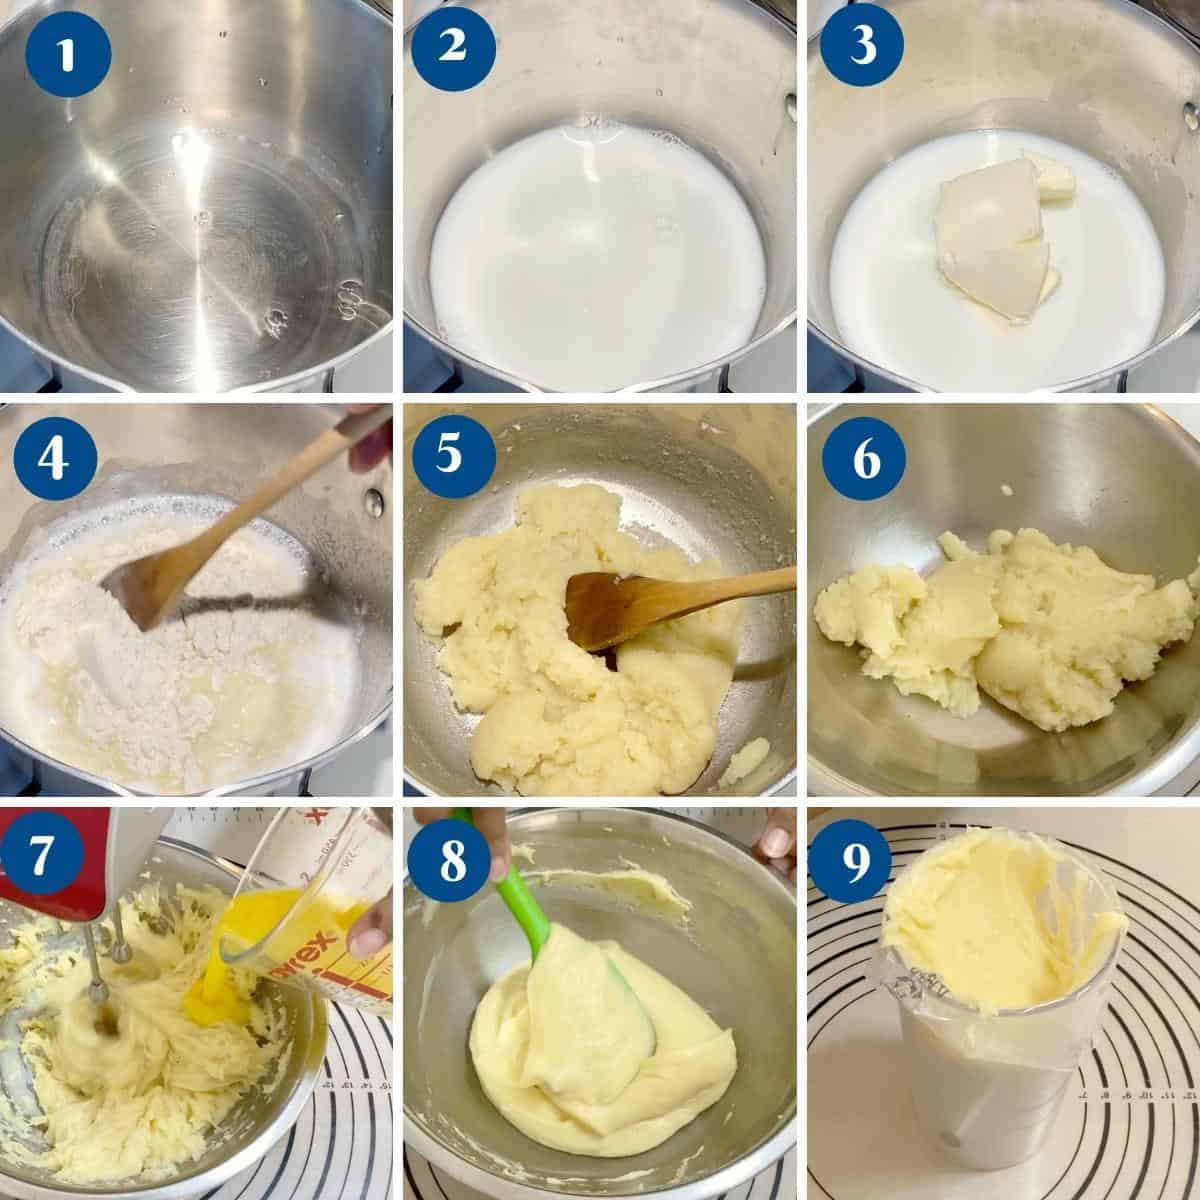 Progress pictures collage making the choux pastry dough.